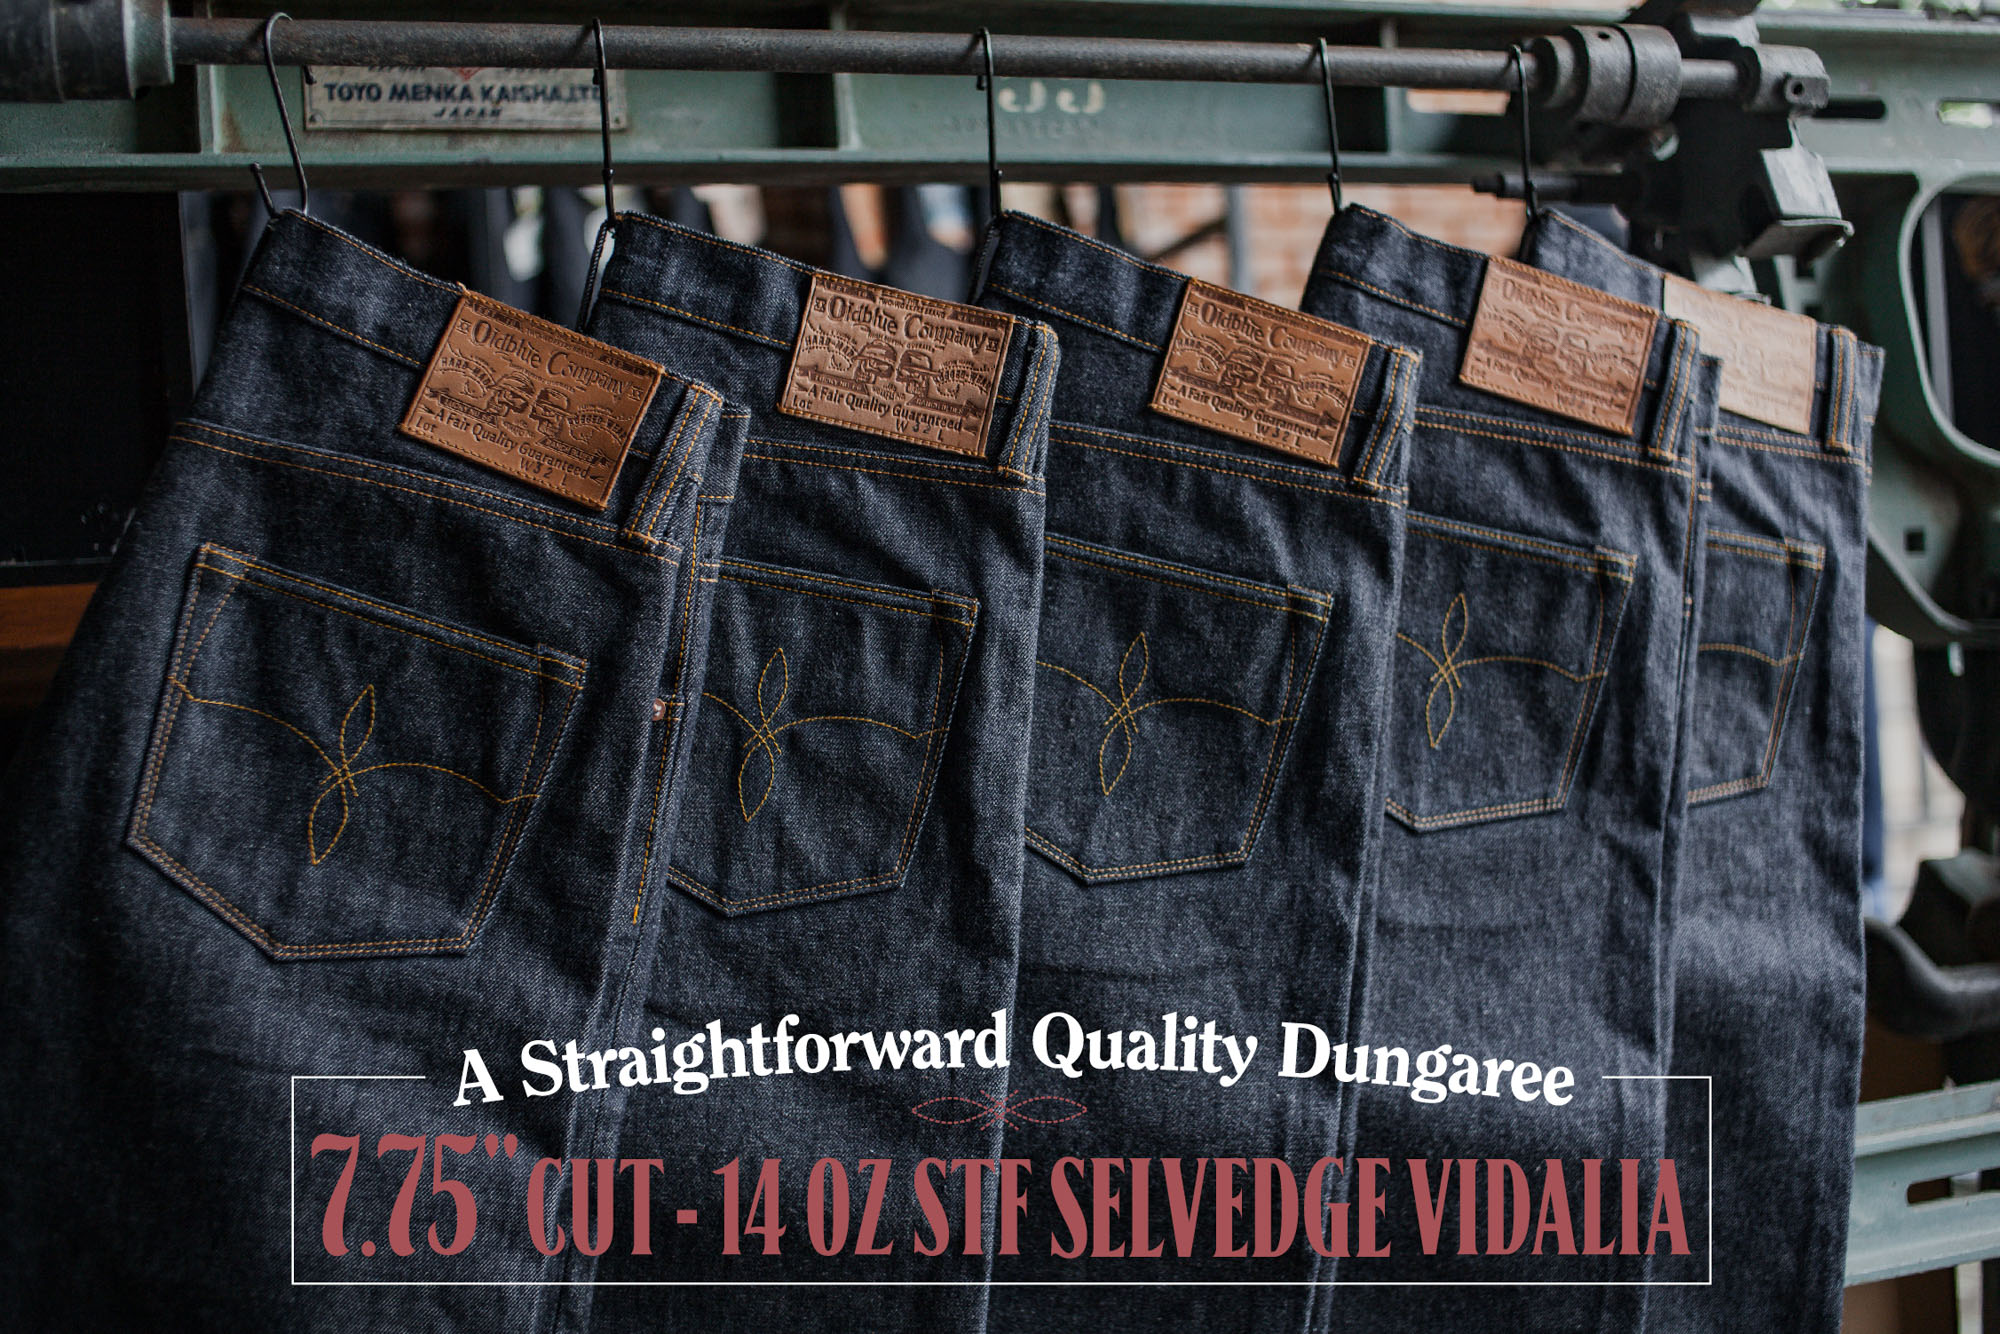 NEW IN: THE 14 OZ STF SELVEDGE VIDALIA IS NOW AVAILABLE IN 7.75" CUT!